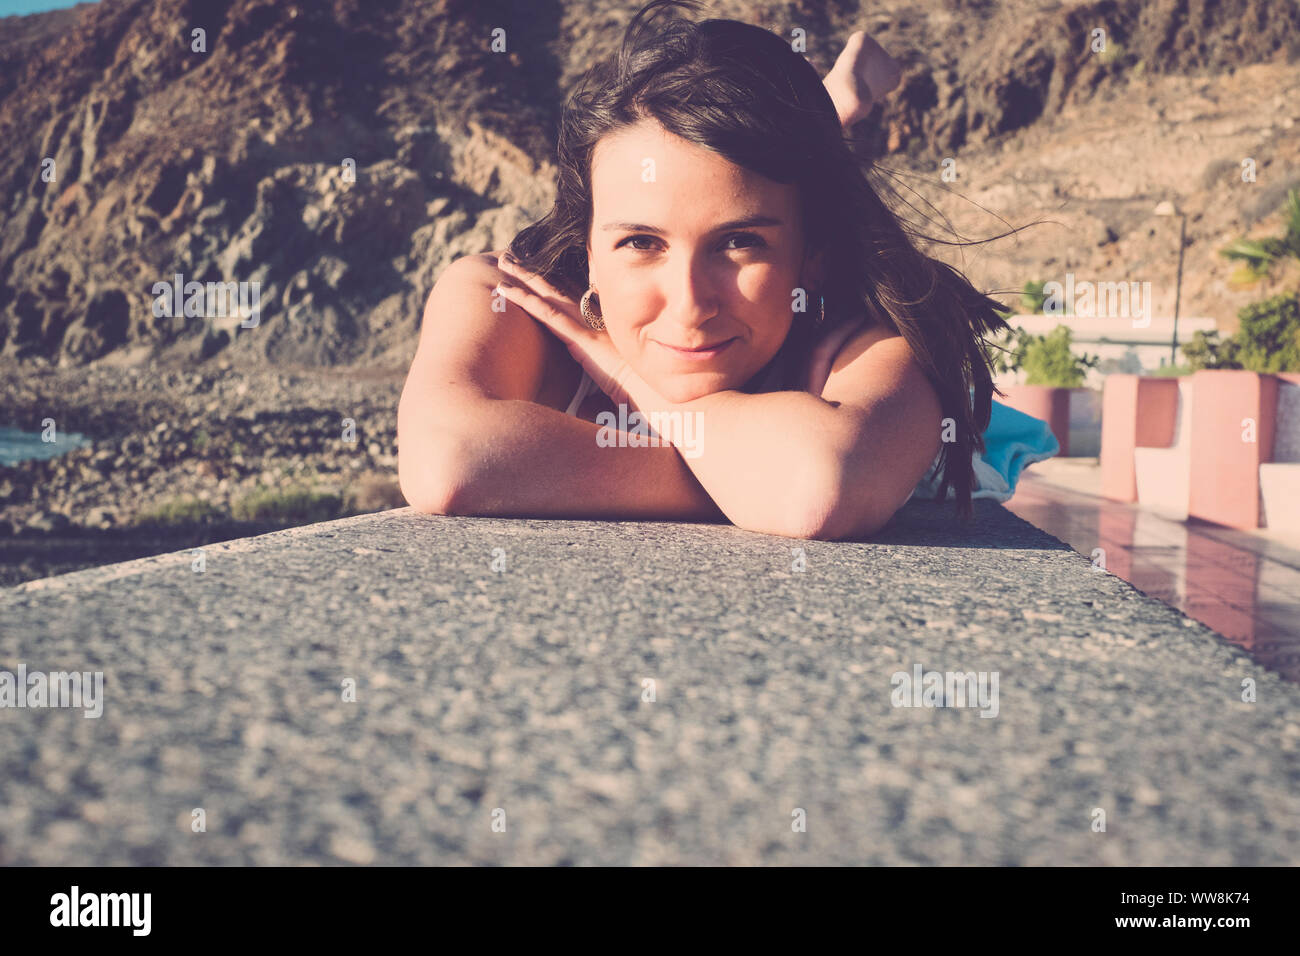 long hair spanish young woman erlaxing lay down on a wall near the beach. Sunlight on her beauty face, smile and enjoy the time. Stock Photo